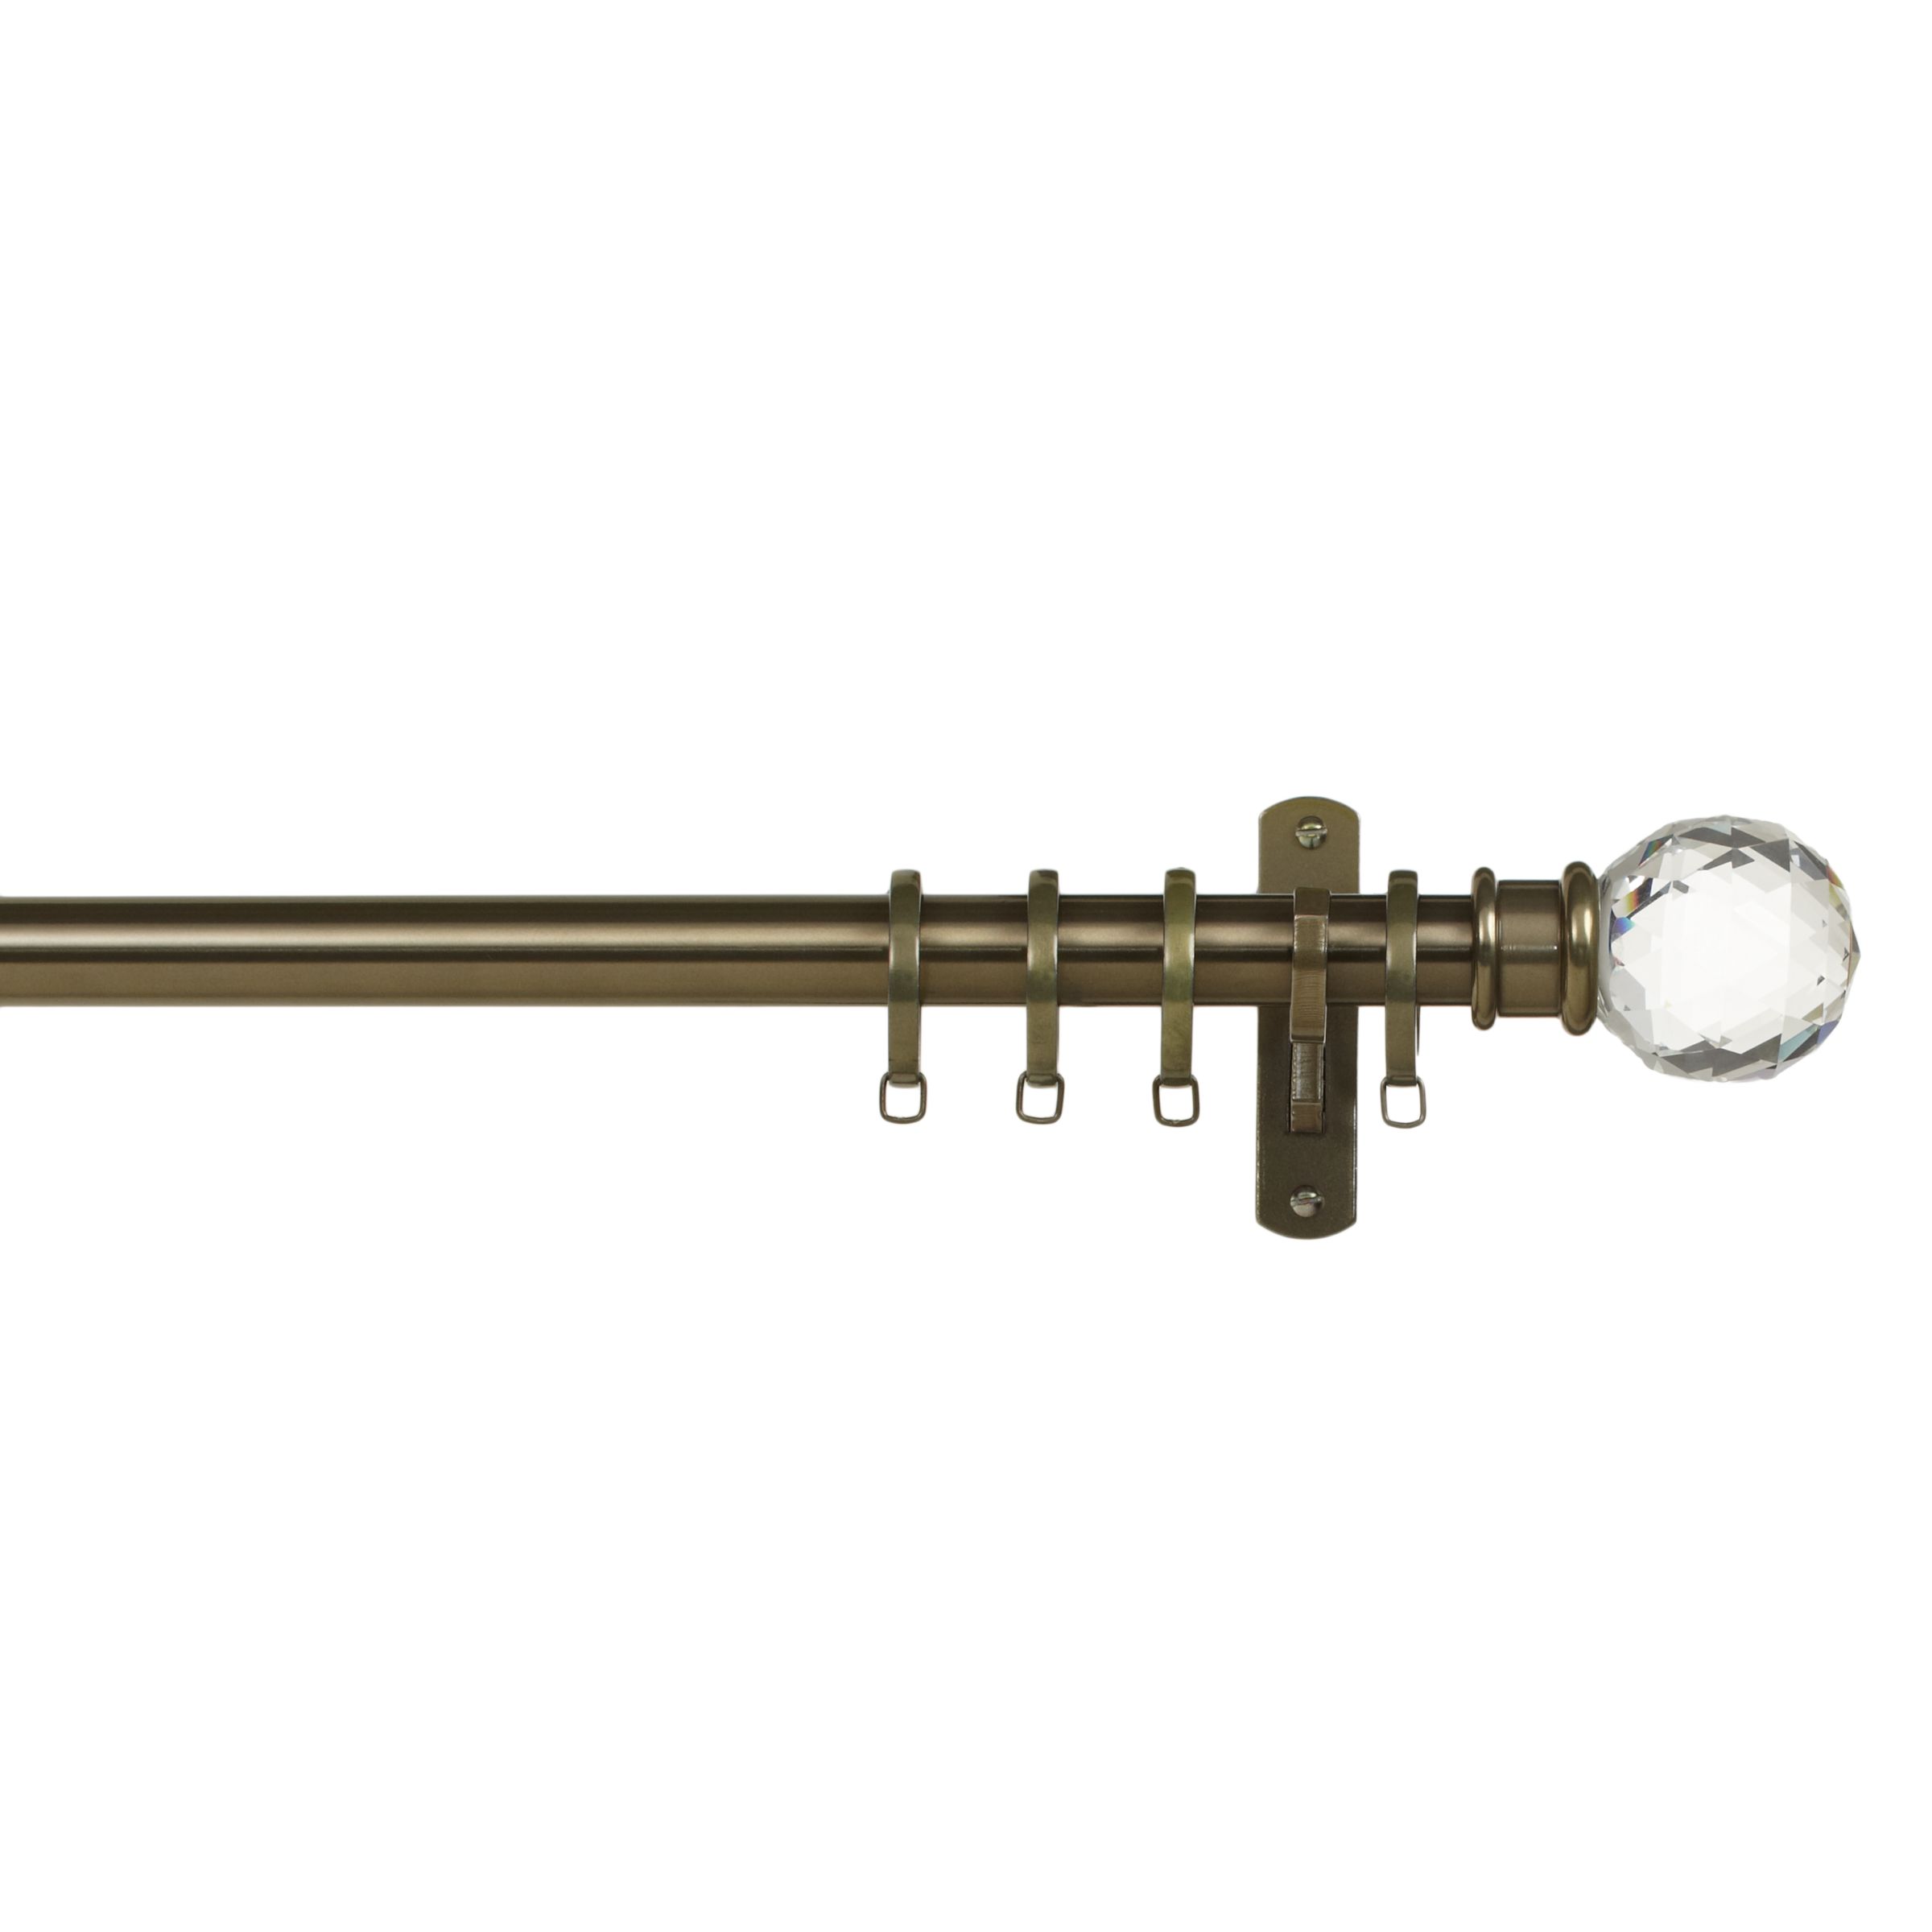 John Lewis Made to Measure Classic Straight Curtain Pole, Crystal Ball Finial